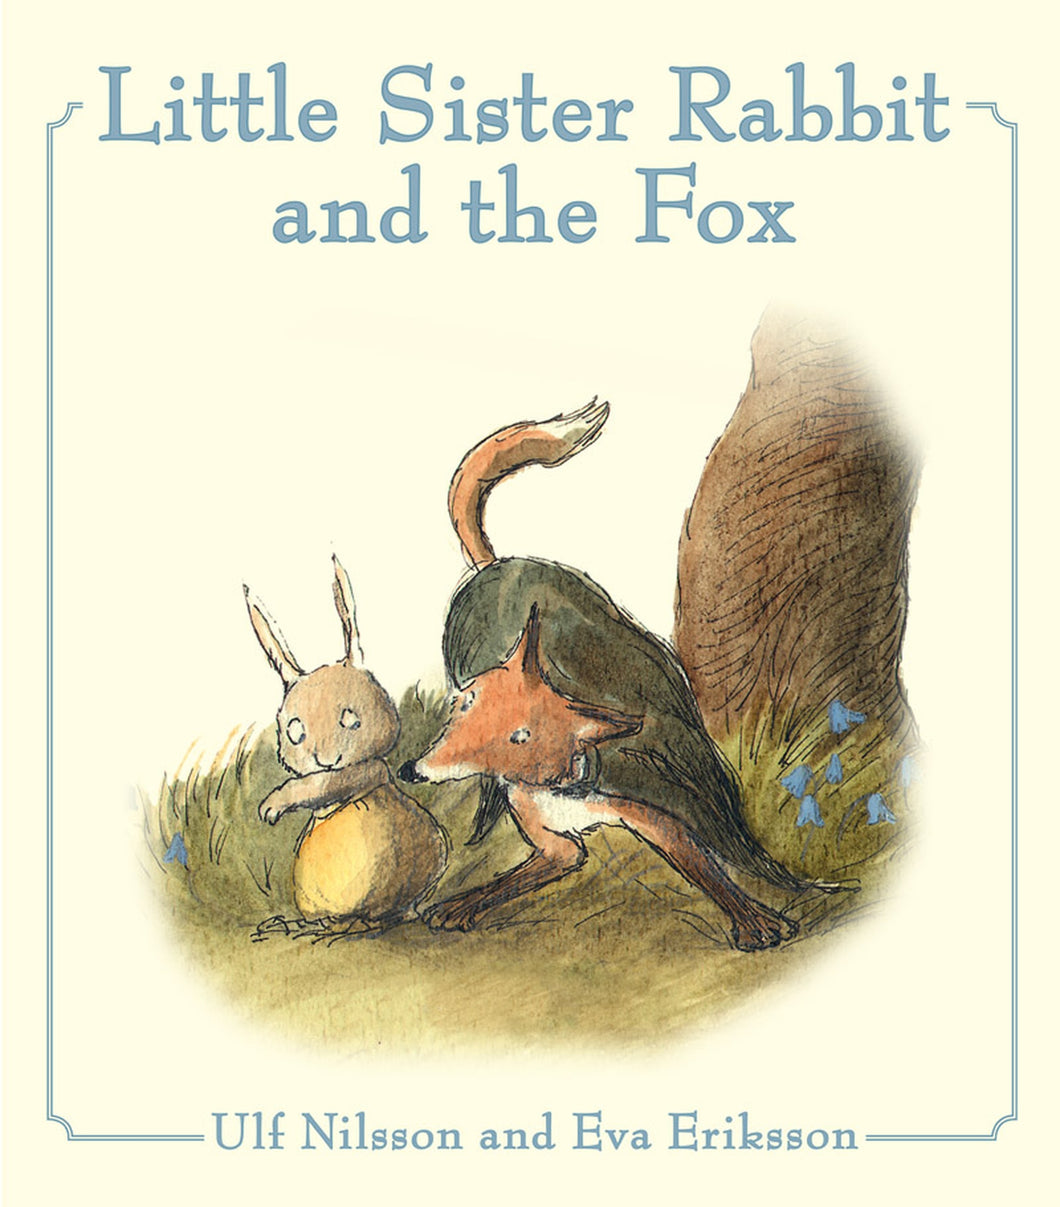 <i>Little Sister Rabbit and the Fox</i> by Eva Eriksson and Ulf Nilsson